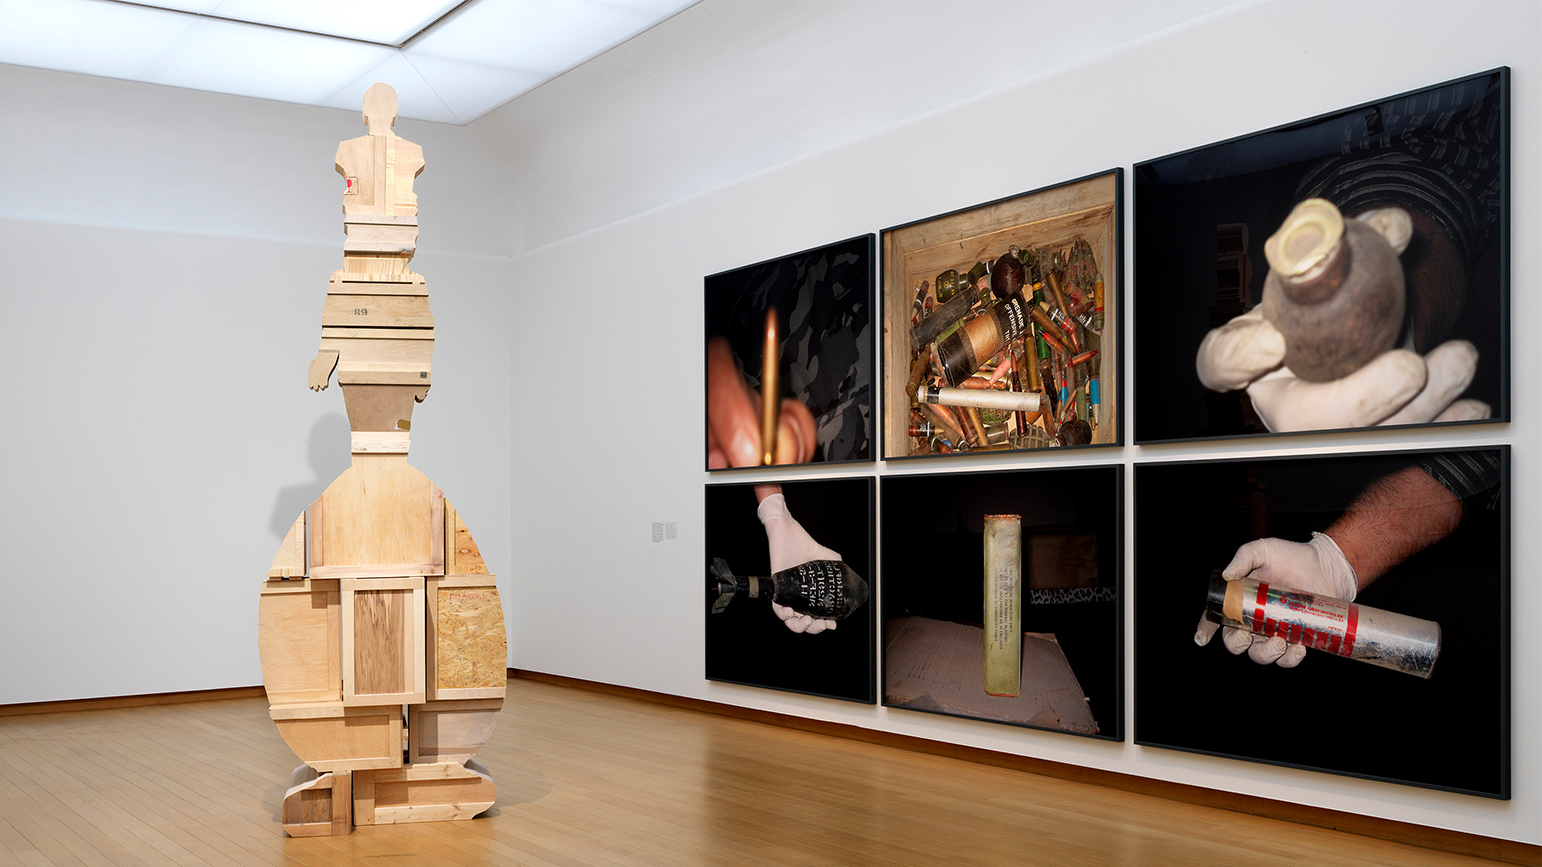 Installation view of an exhibition showing an abstract wood sculpture and photographs of instruments of war (bullets, bombs, etc.)